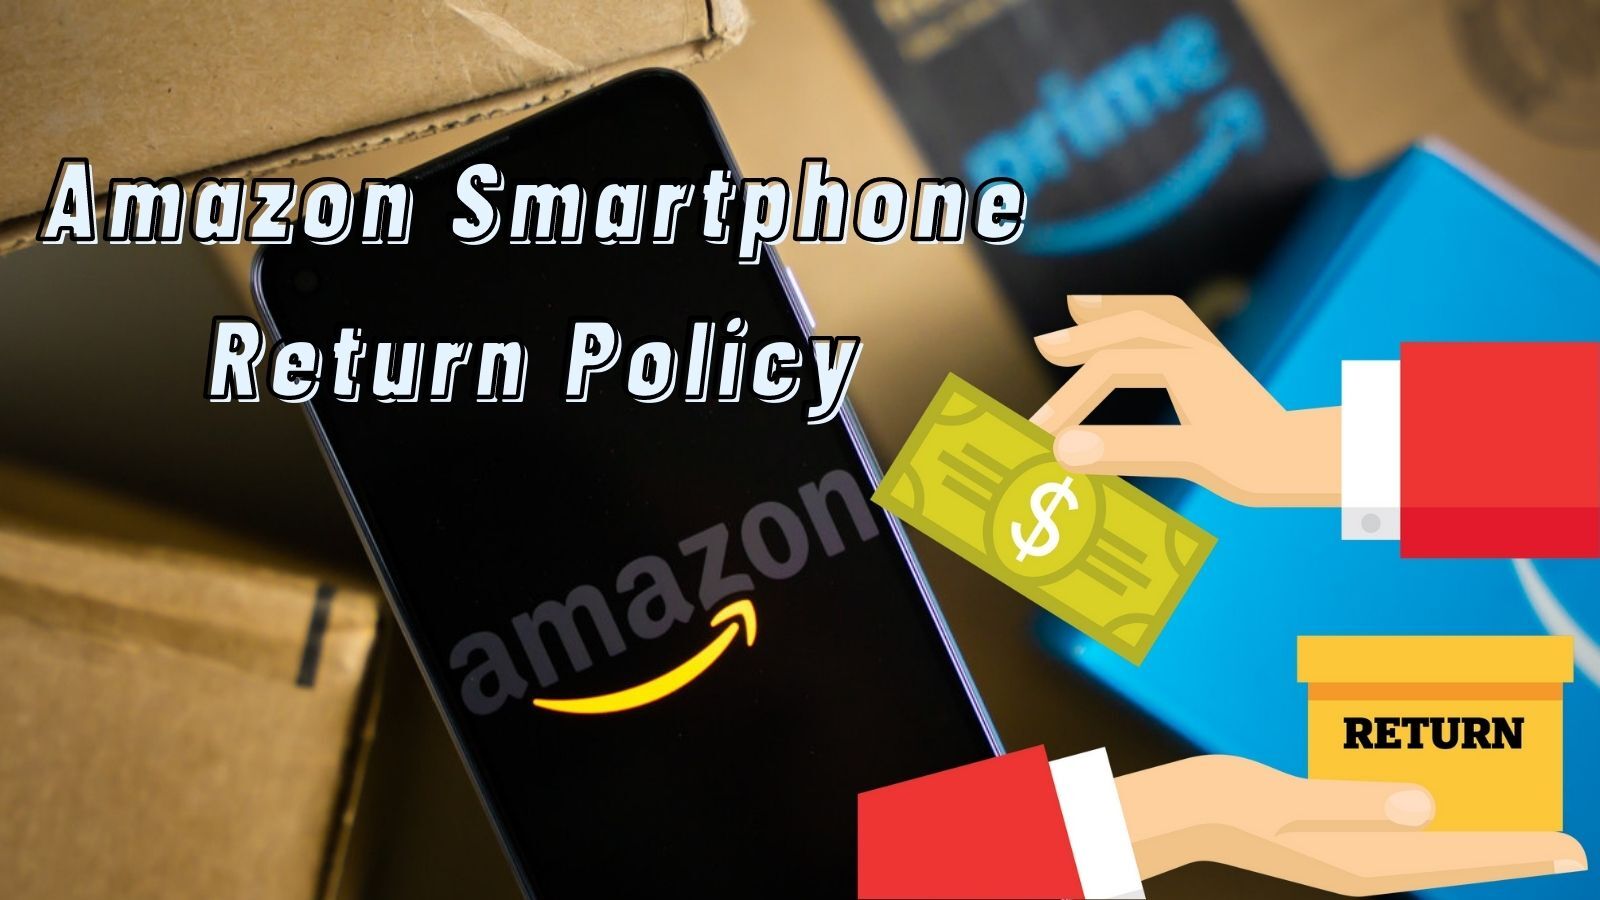 Amazon Smartphone Return Policy (All You Need to Know!)